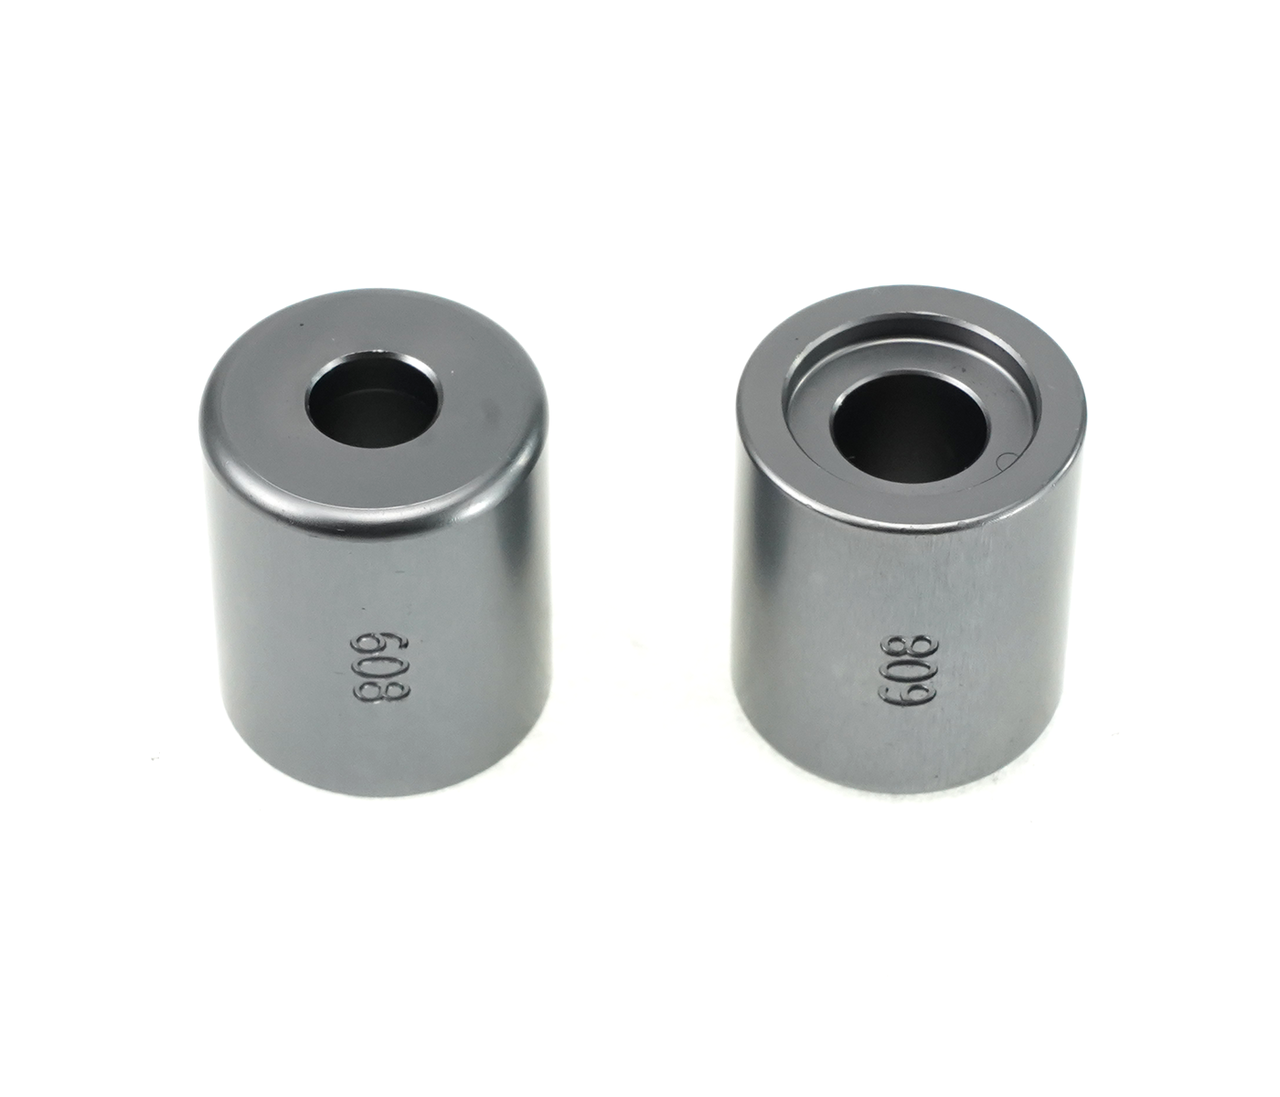 Enduro HT 608 Outer - Outer Bearing Guide for Bearing Press (BRT-005 or BRT-050)  - single guide only